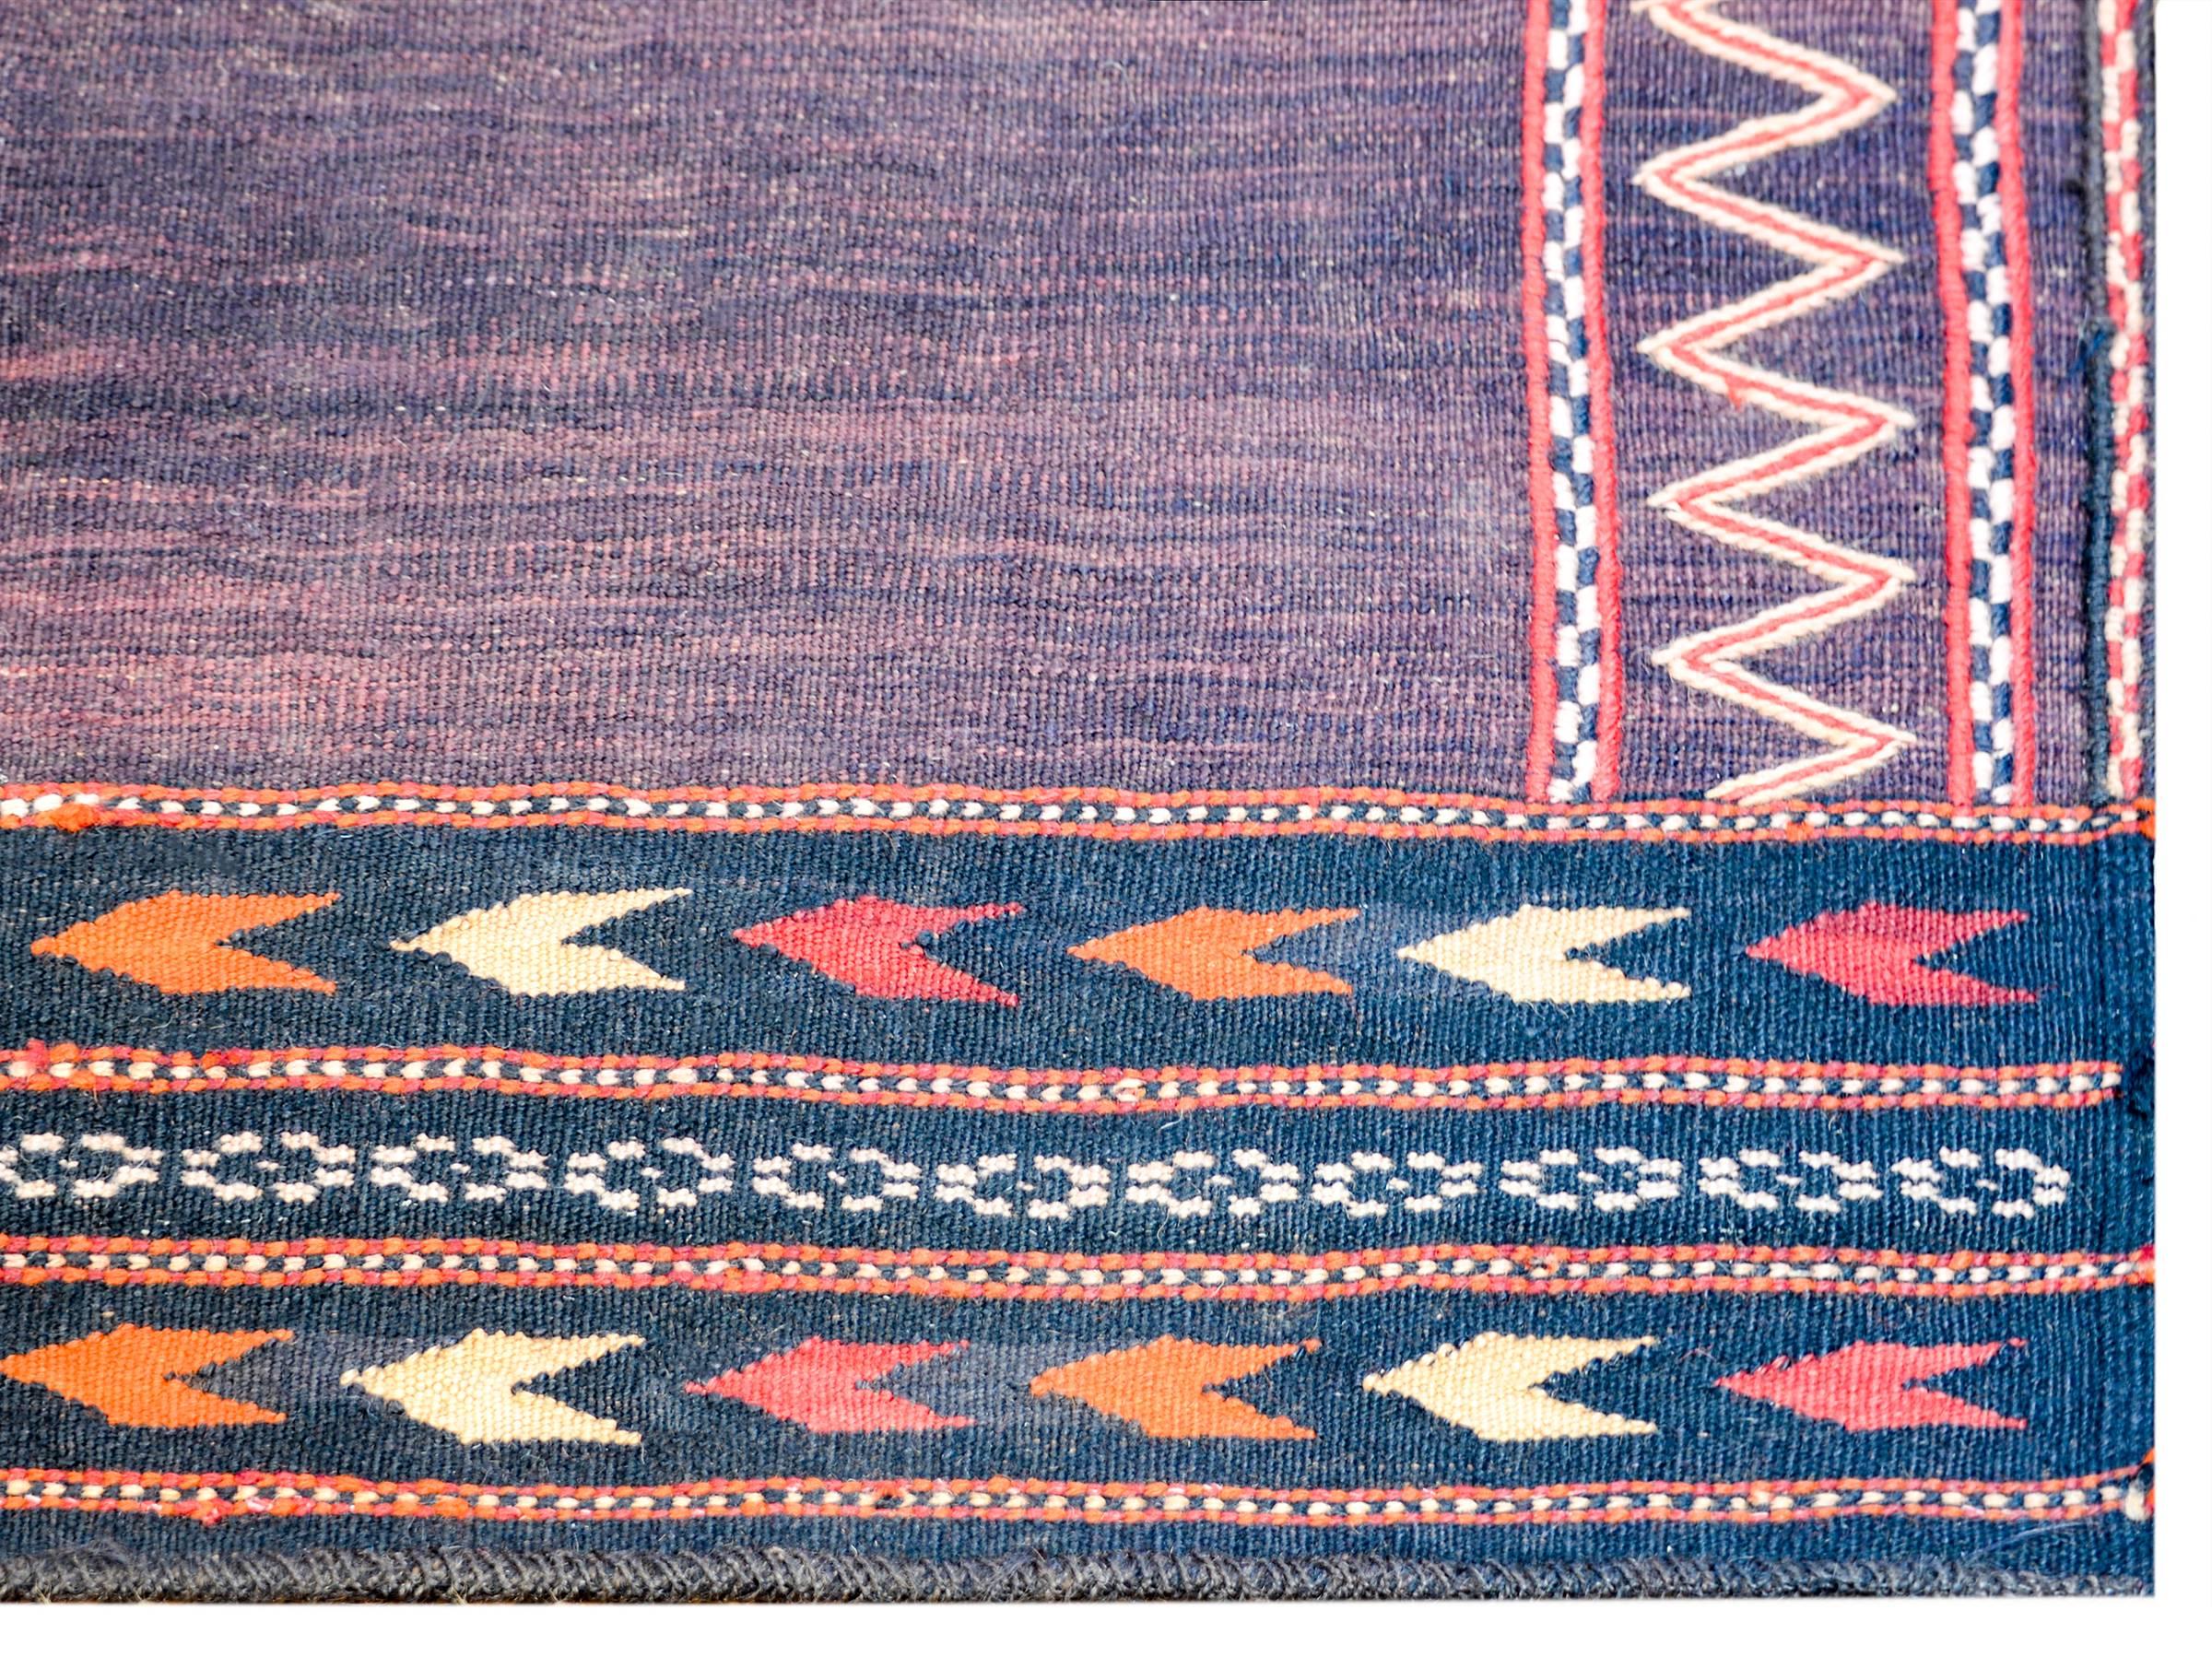 A beautiful early 20th century Baluch Sofreh with a beautiful abrash undyed wool field surrounded by two different zigzag and stripe borders woven in crimson, orange, and natural cream colored wool.